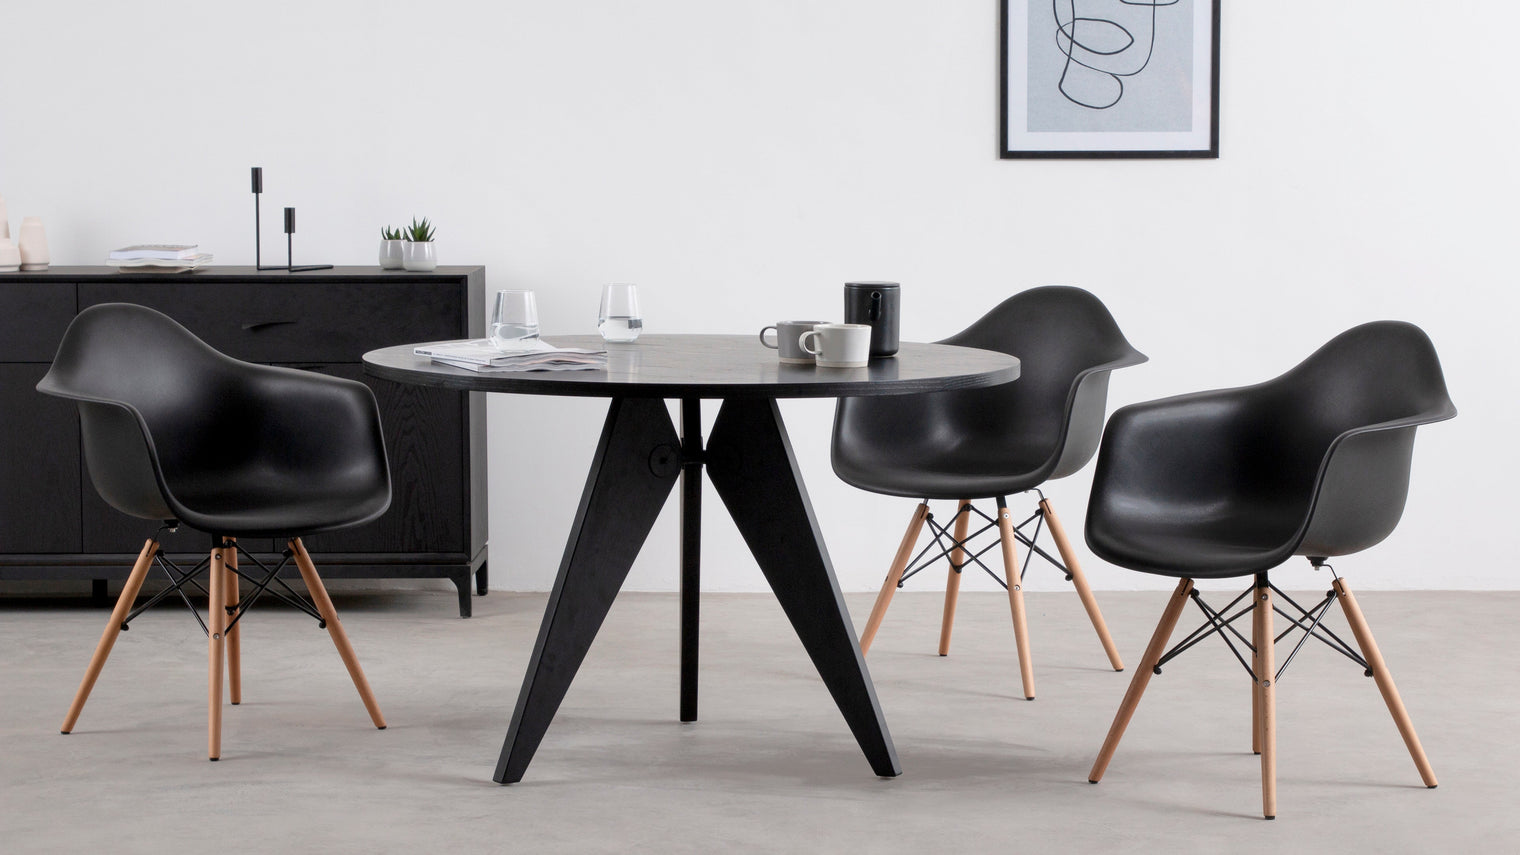 The perfect dining chair|Specifically designed for comfortable dining, the Flynn Armchair is an integral part of our molded chair collection. Arguably one of the most comfortable, ergonomic chairs for daily dining, this customizable seating solution features a wood and steel base and expertly curved shell/seat.
